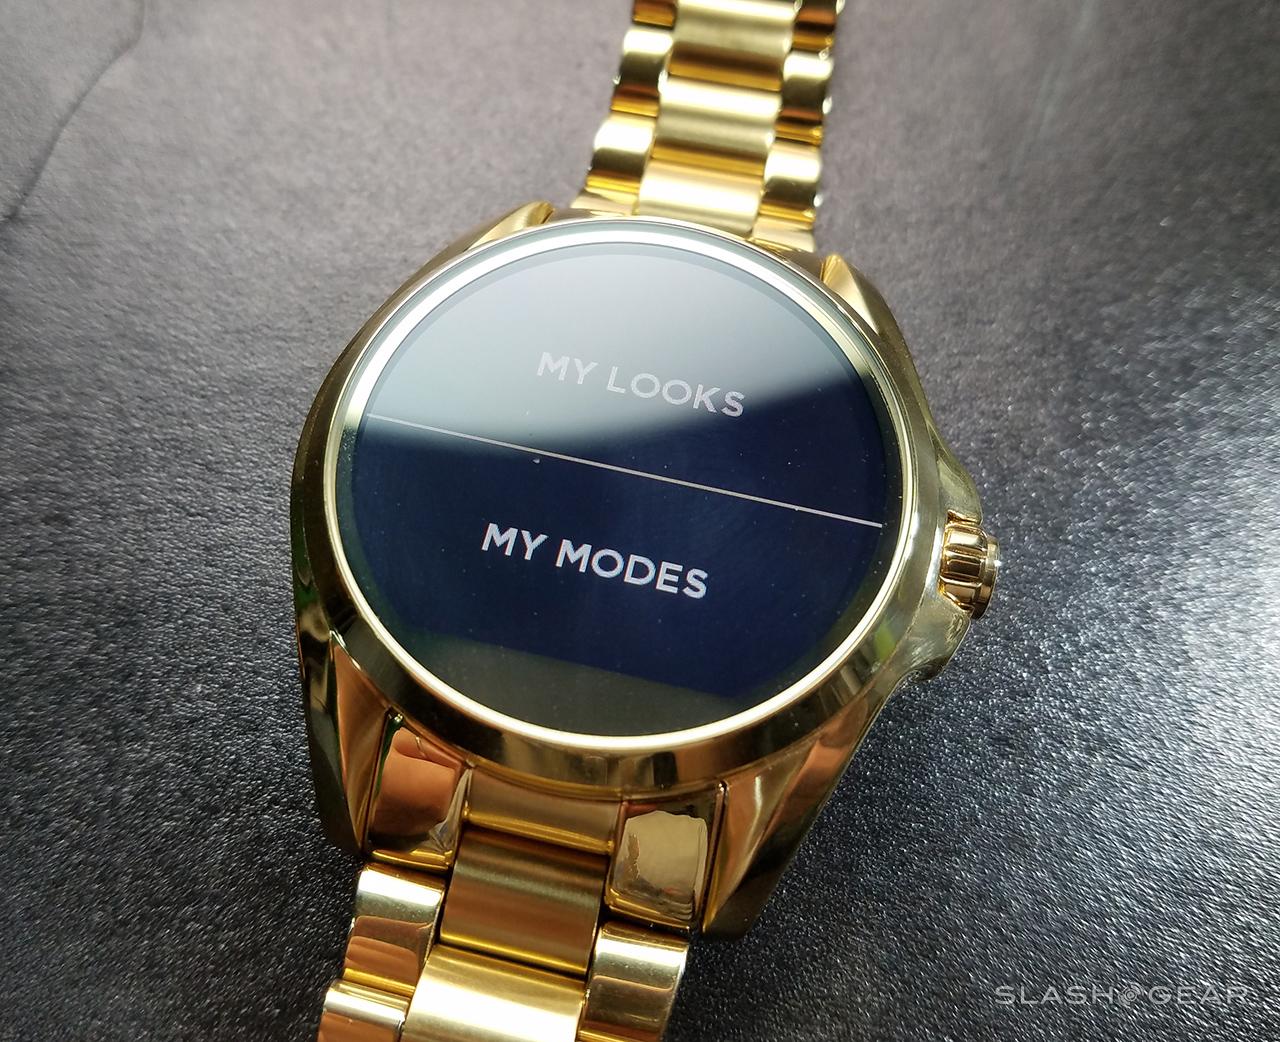 michael kors android watch app